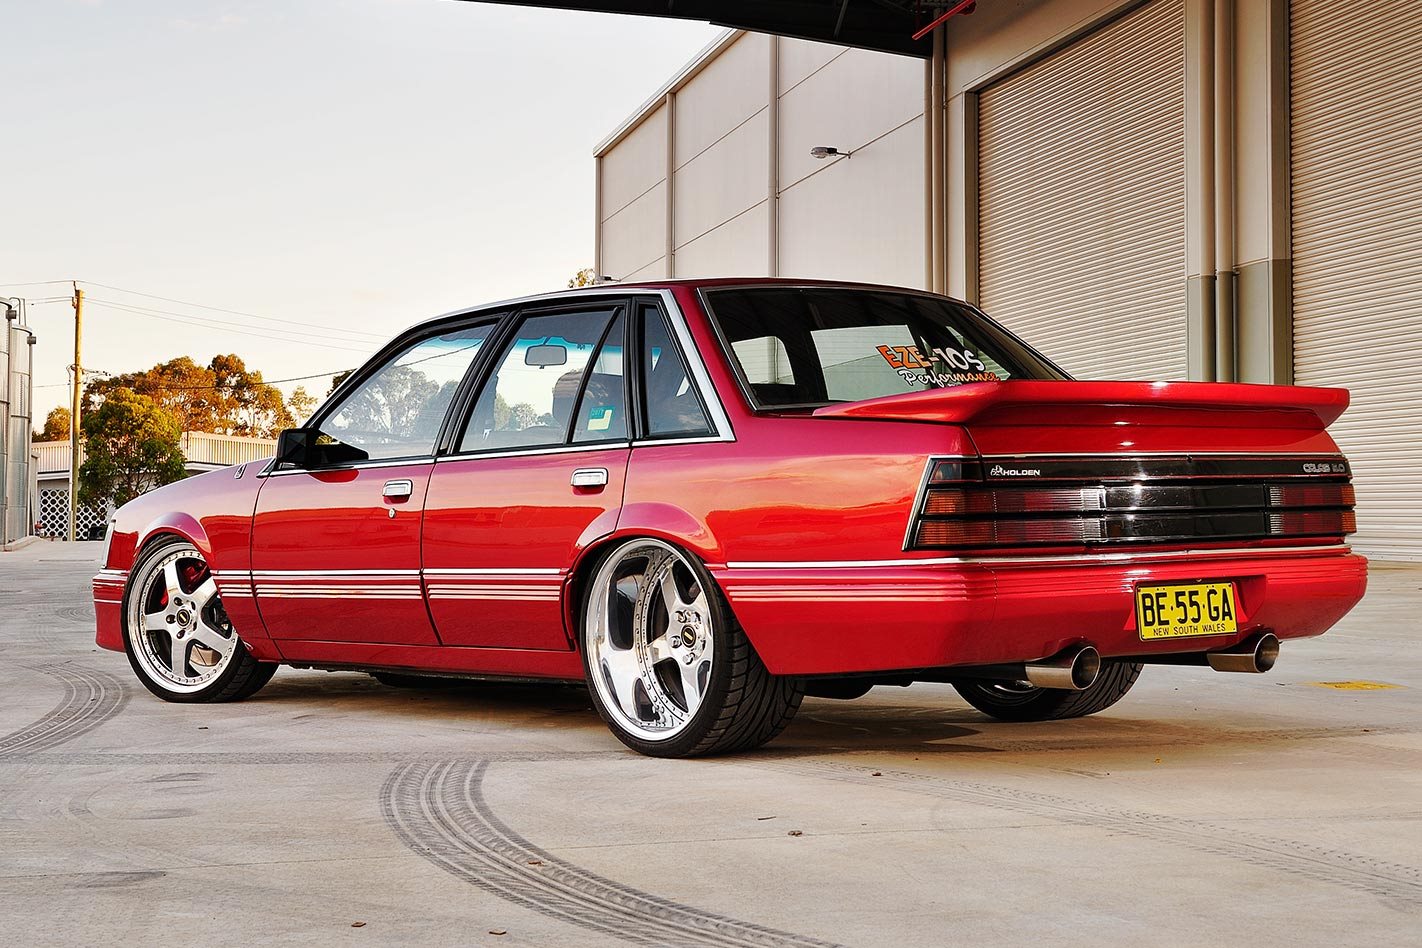 Holden Commodore VK Group A Group 3 Sedan Auctions - Lot 